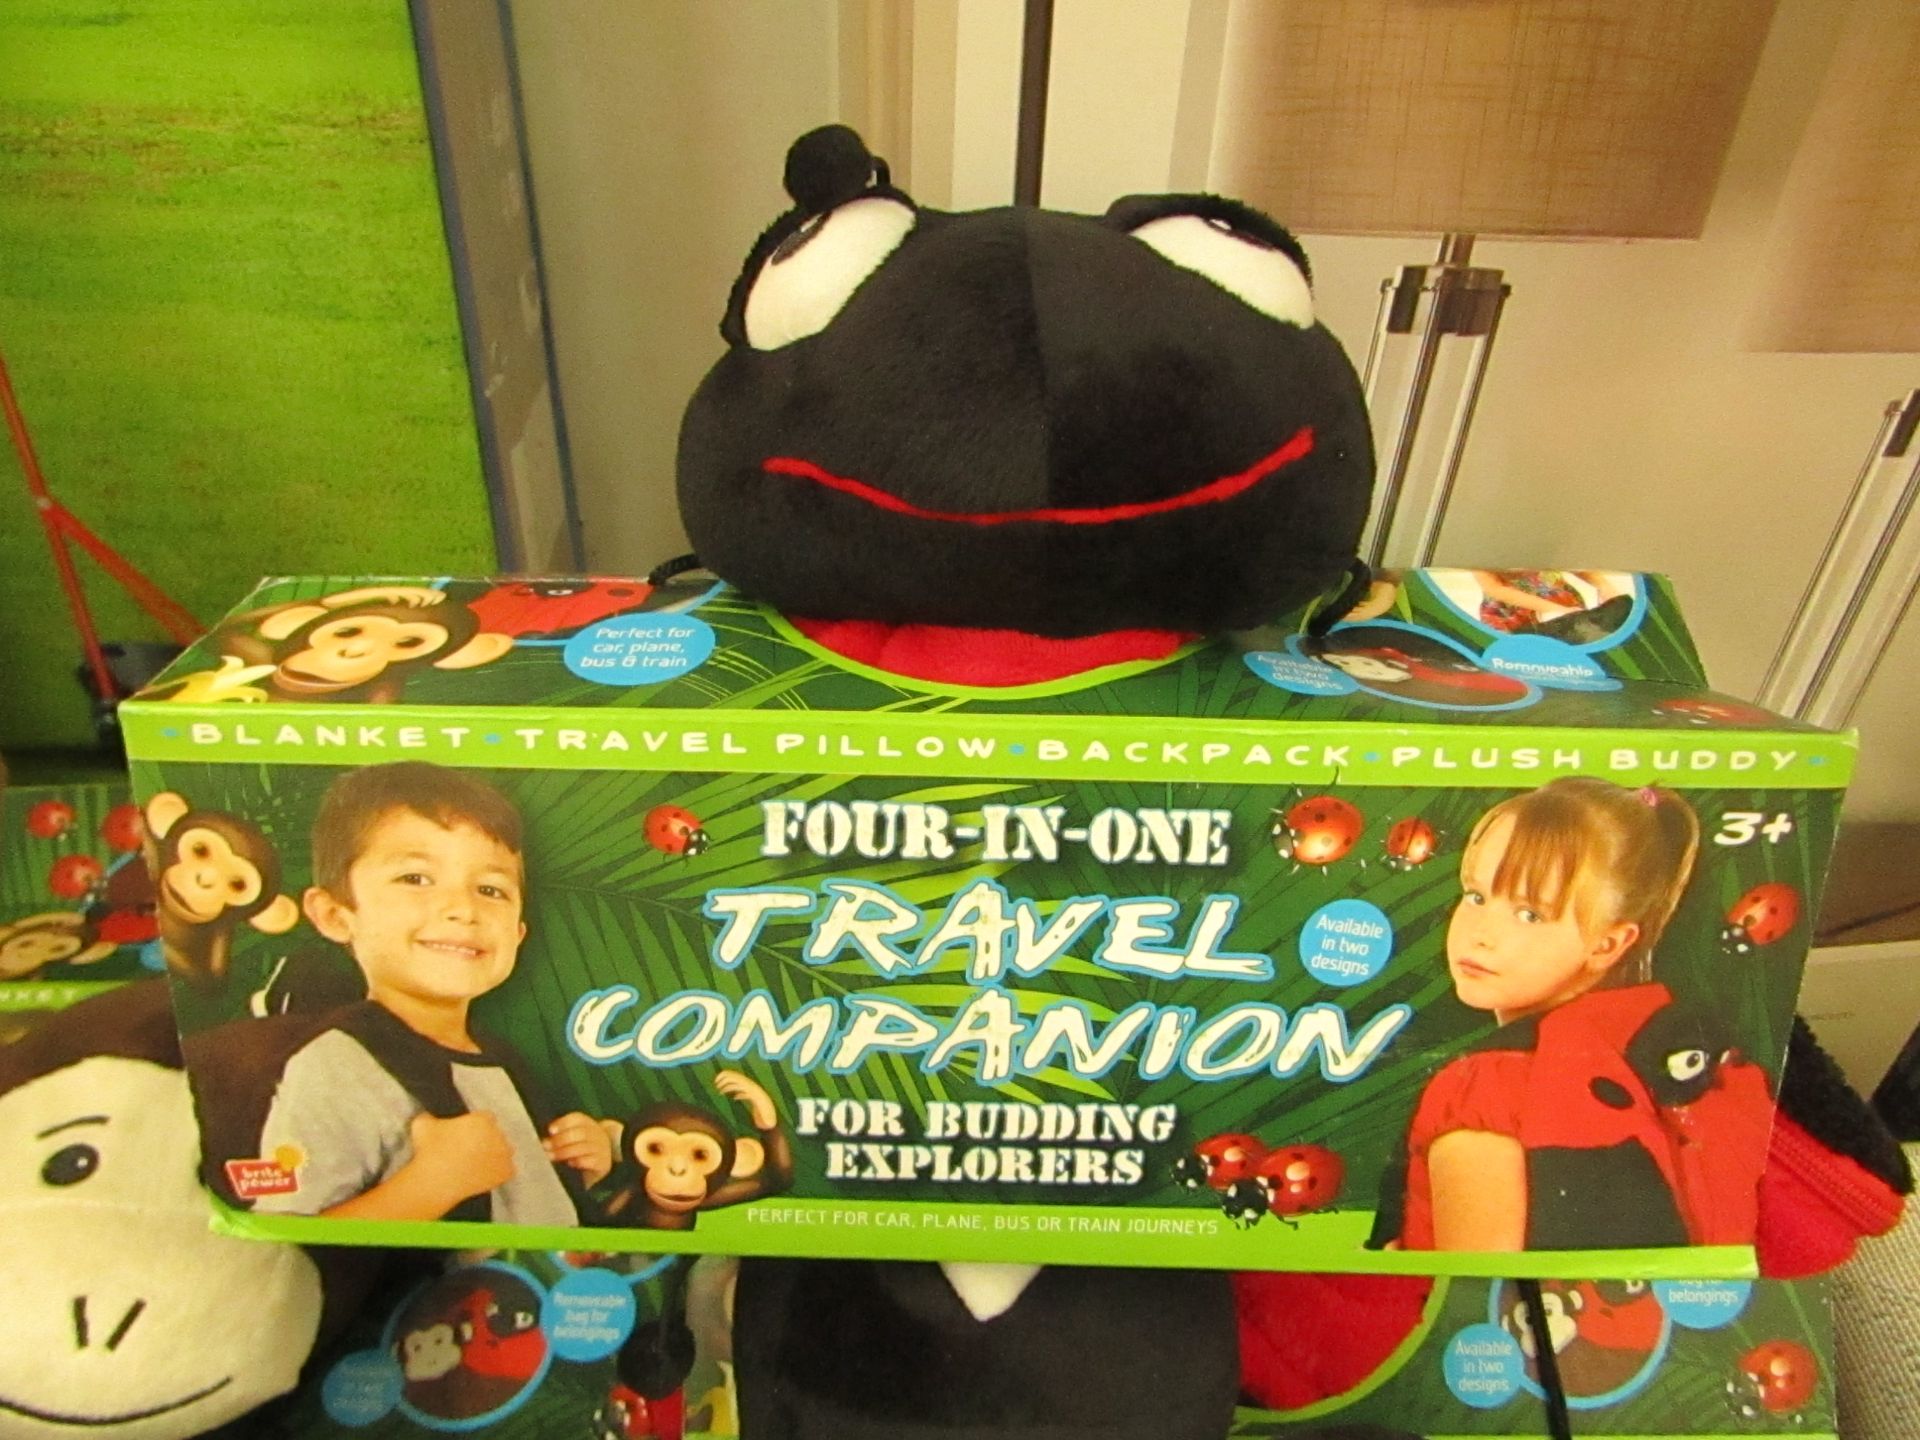 4 in 1 Travel Companion, it is a Blanket, pillow, back pack and Plush Buddy, new